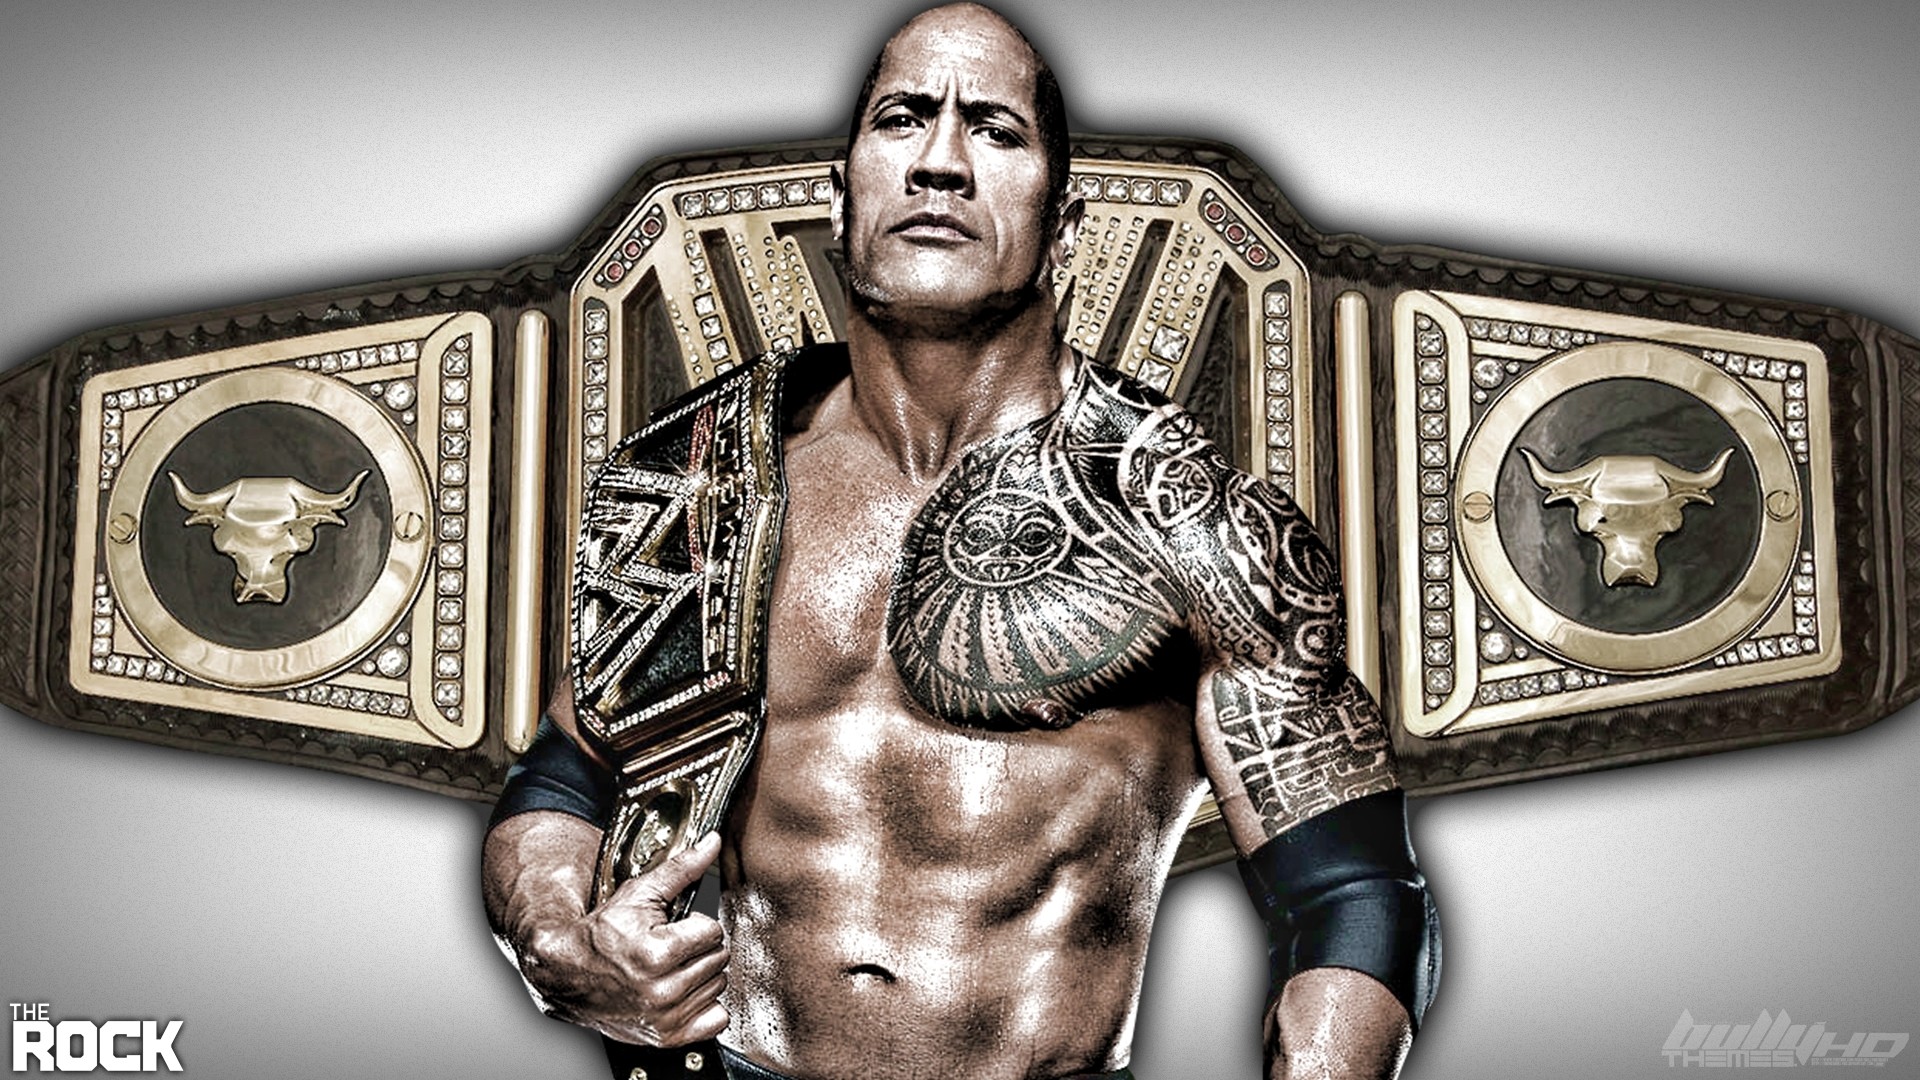 The Rock with the WWE Championship. wallpaper HD Davids wrestling Pinterest Hd wallpaper and Wallpaper